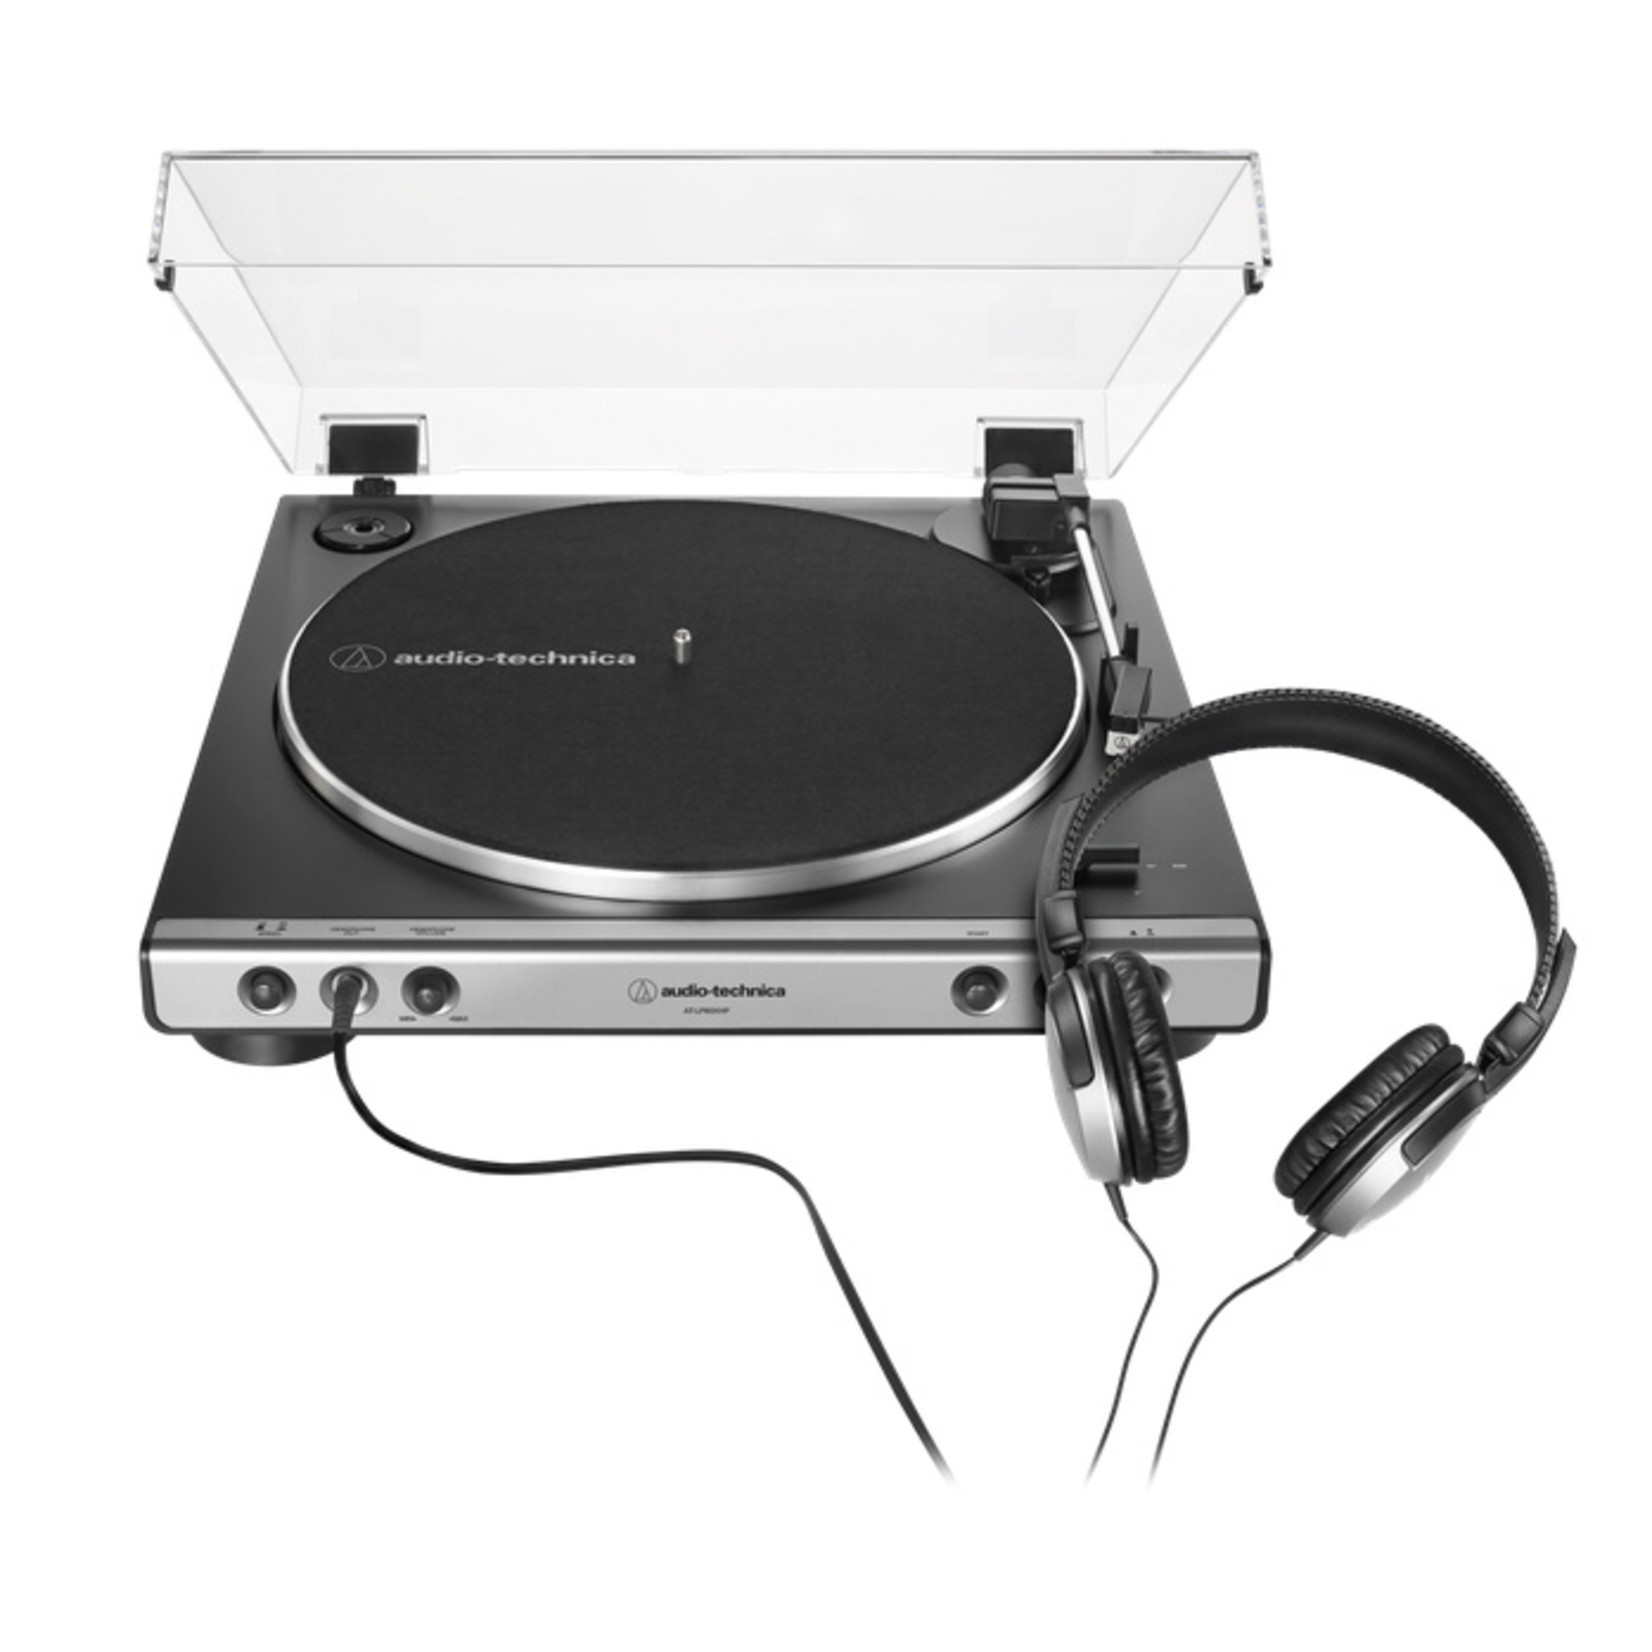 Fully Automatic Belt-Drive Turntable With Headphones - Gun-Metal